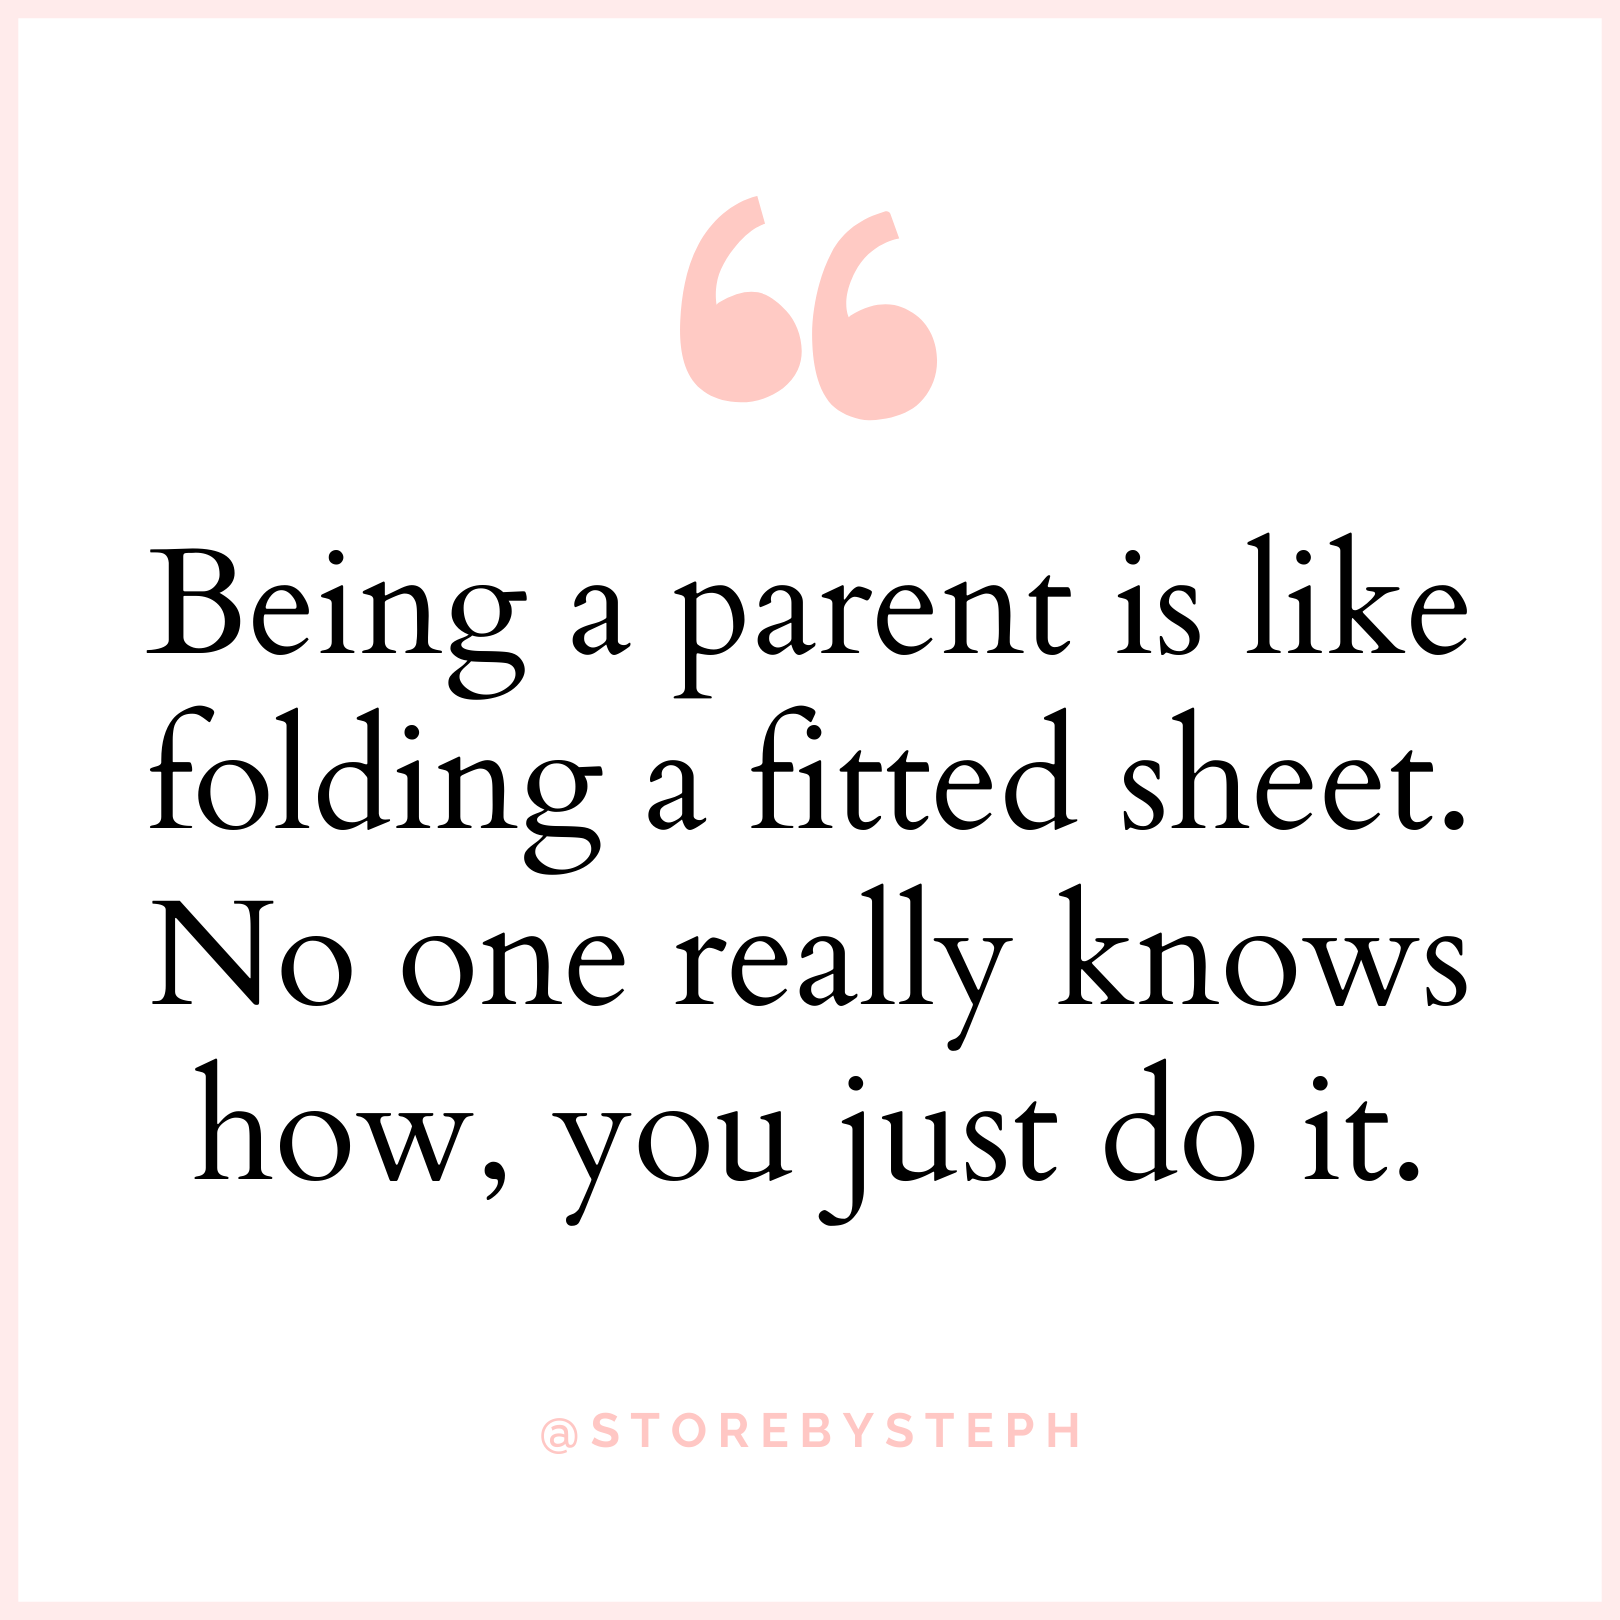 quotes about parenting from instagram account of professional organizer